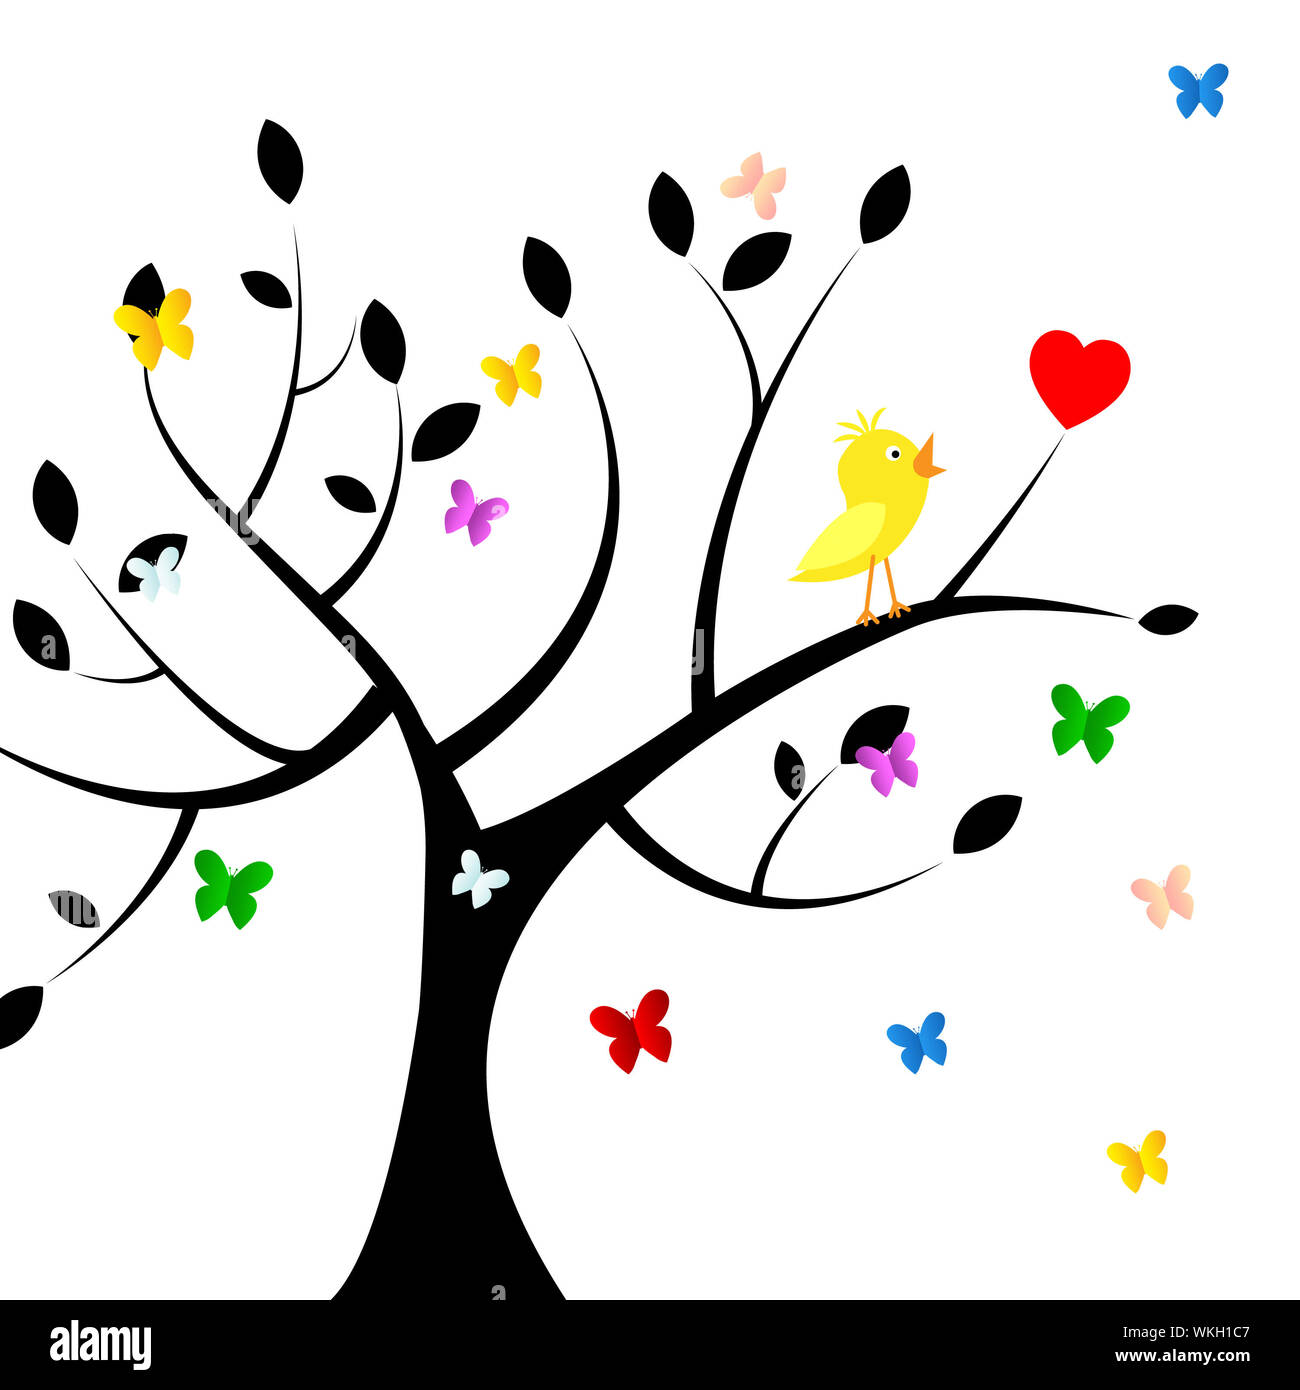 Tree Nature Meaning Flock Of Birds And Flock Of Birds Stock Photo